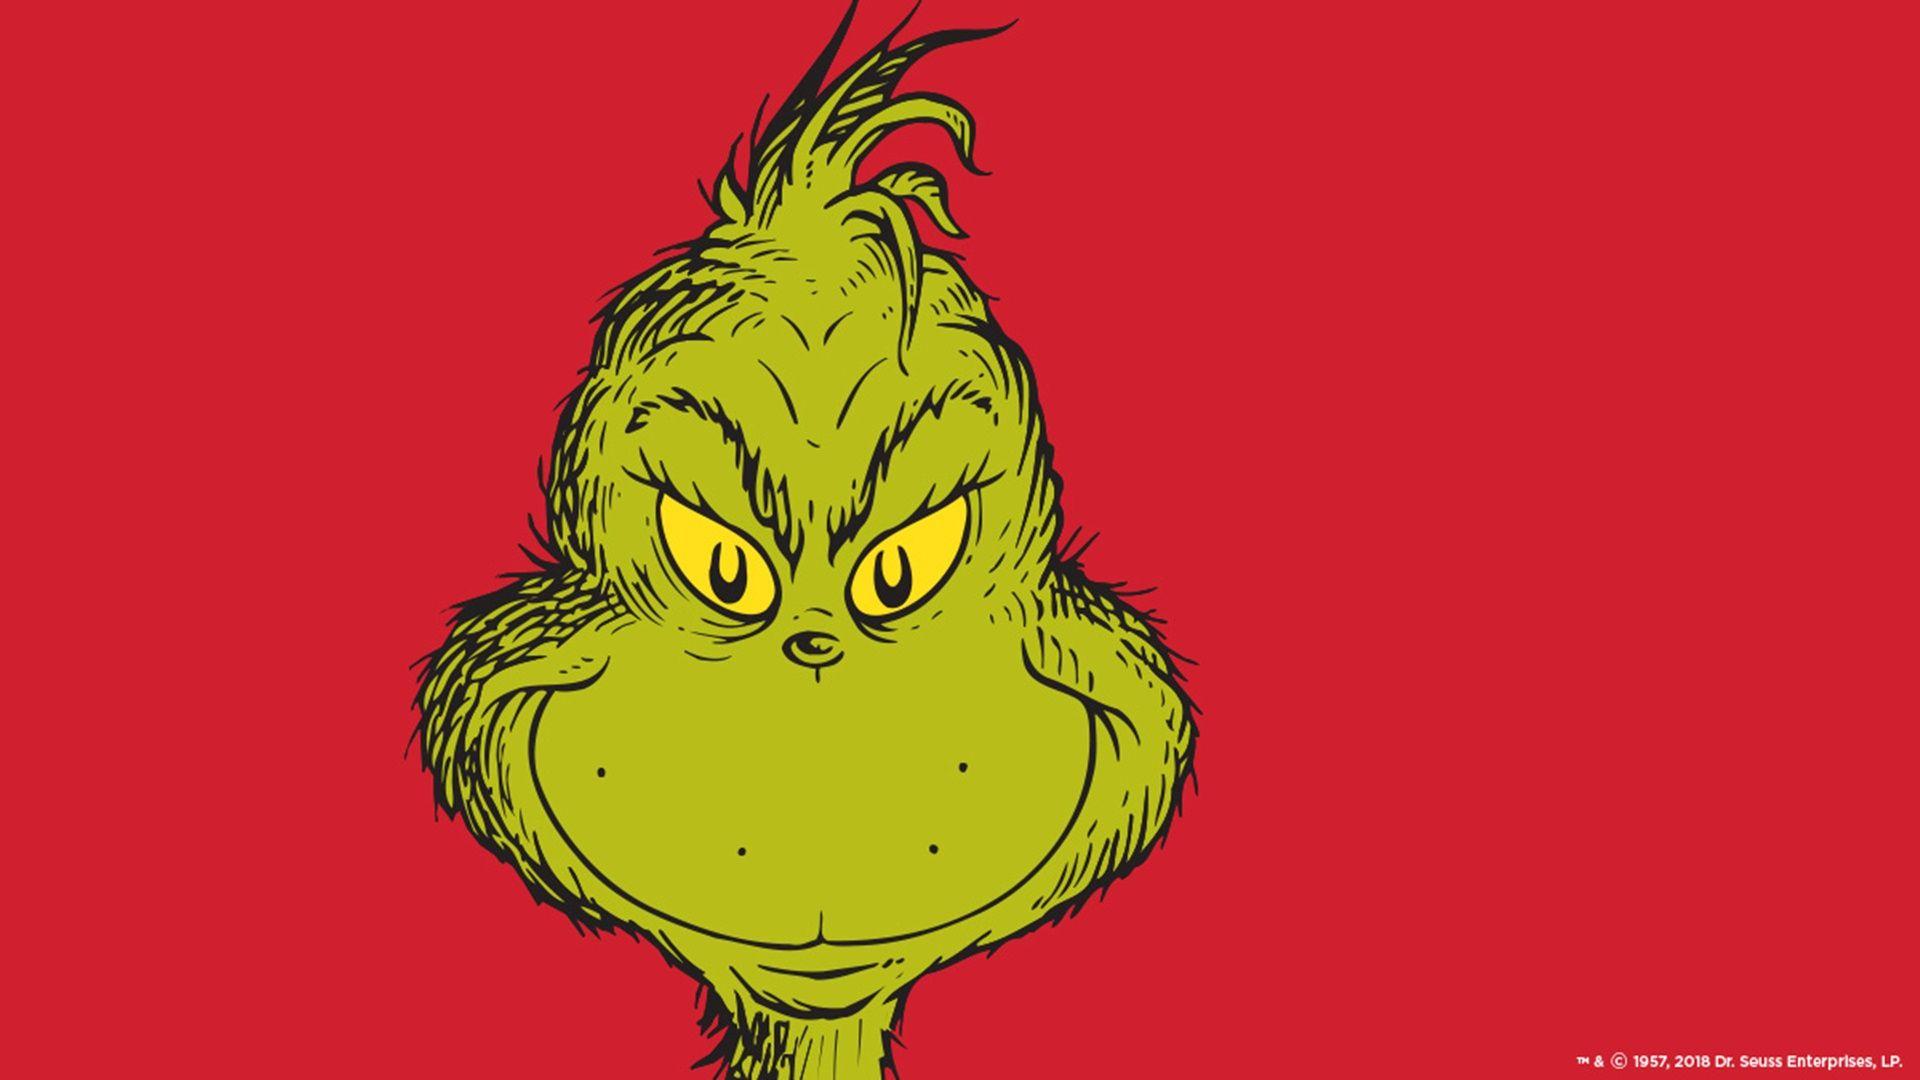 The Grinch Wallpaper Browse The Grinch Wallpaper with collections of  Cartoon Cindy Lou Grinch  Cute cartoon wallpapers Cute disney wallpaper  Cartoon wallpaper